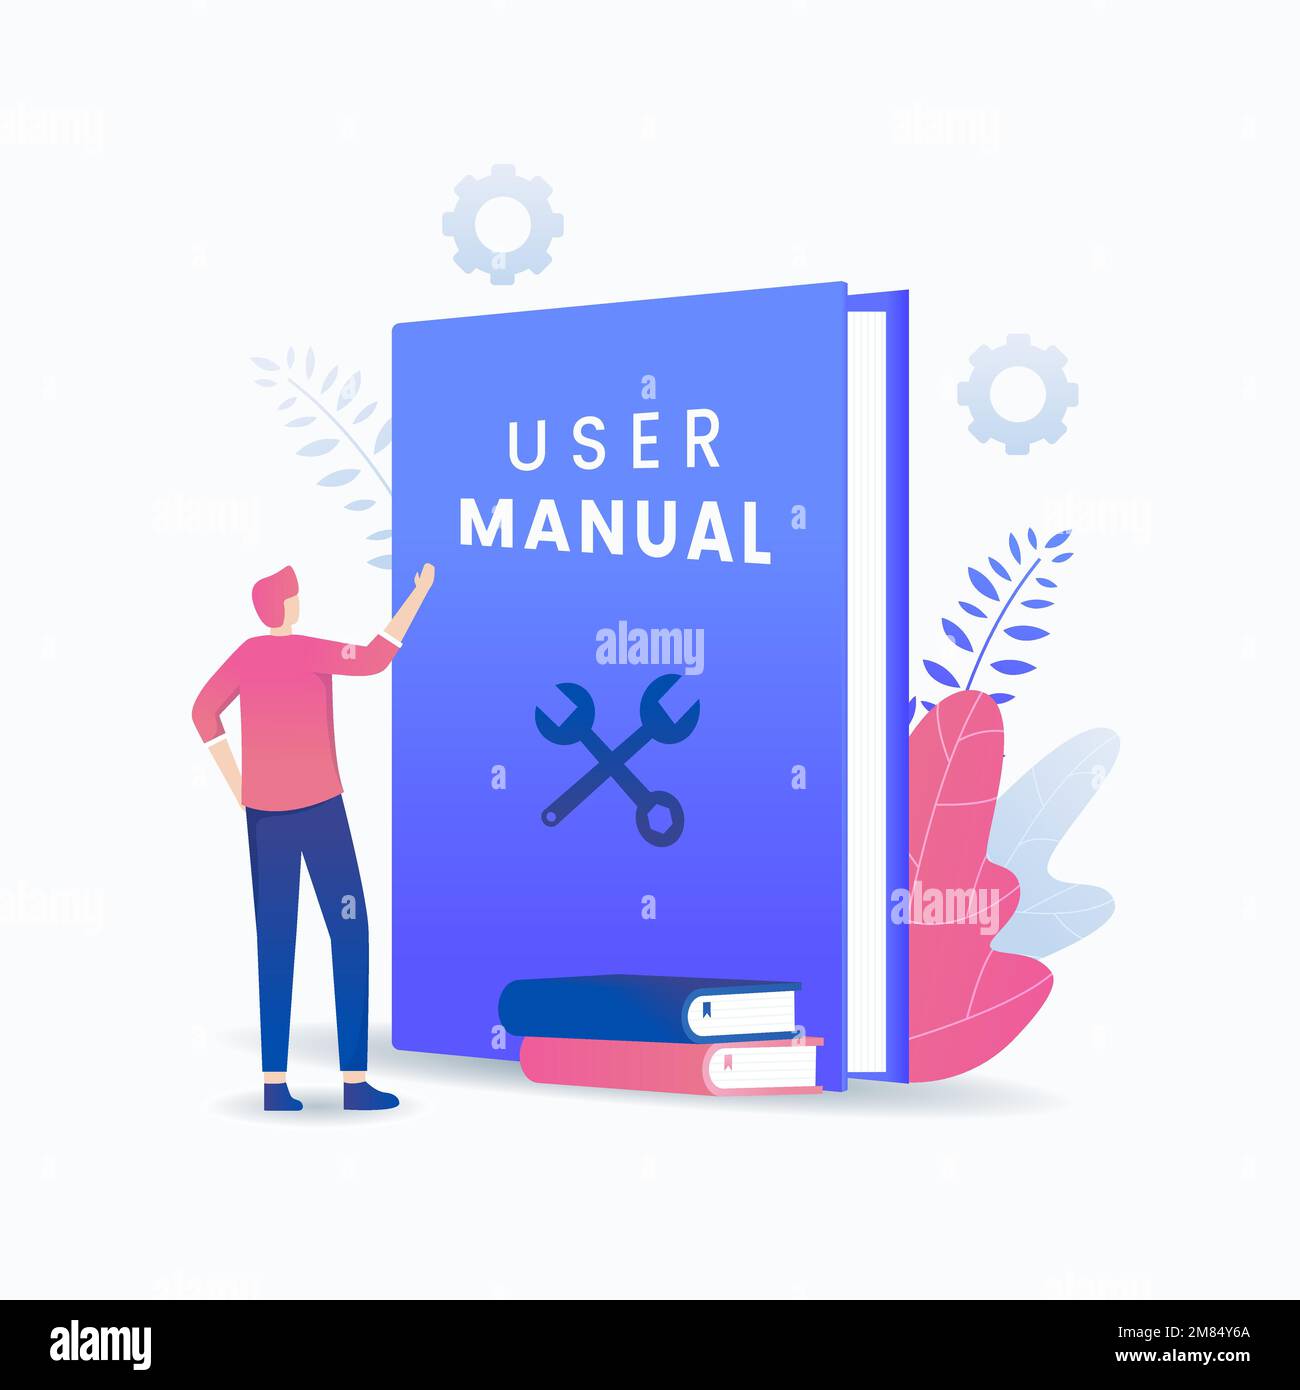 User manual book vector concept. Illustration for websites, landing pages, mobile applications, posters and banners. Stock Vector